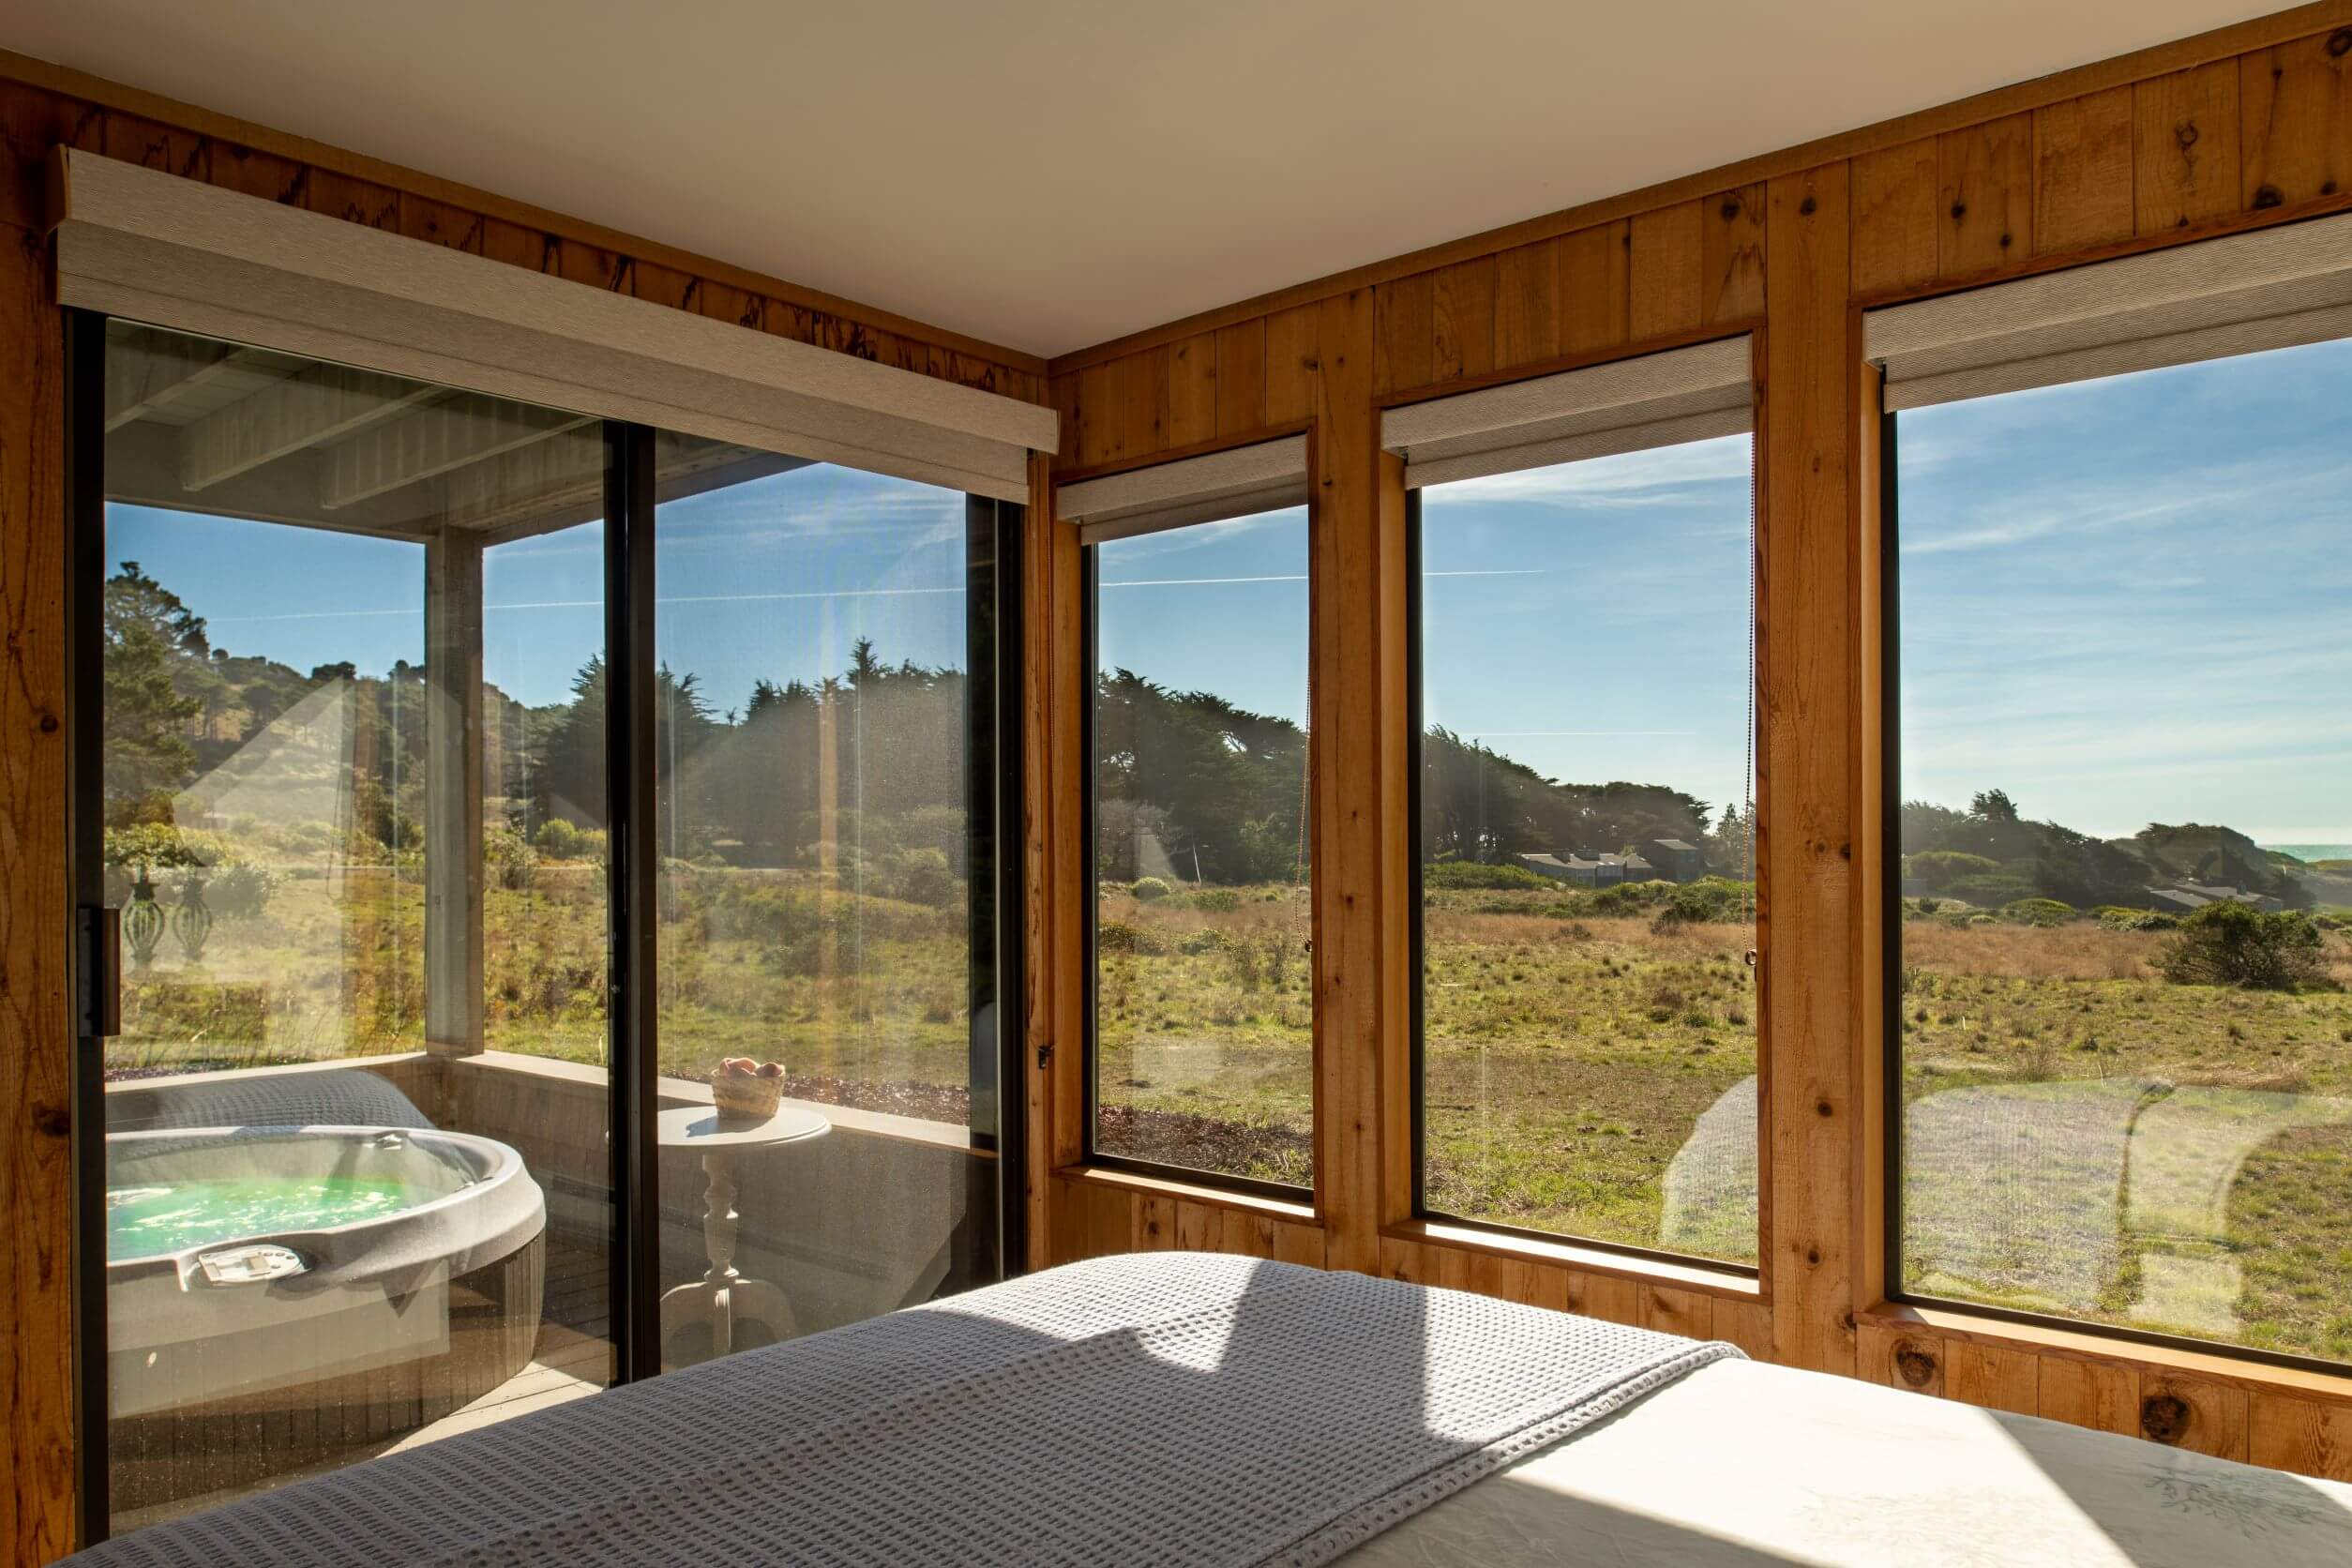 Lighthouse - bright queen bedroom with window view of hot tub and meadow